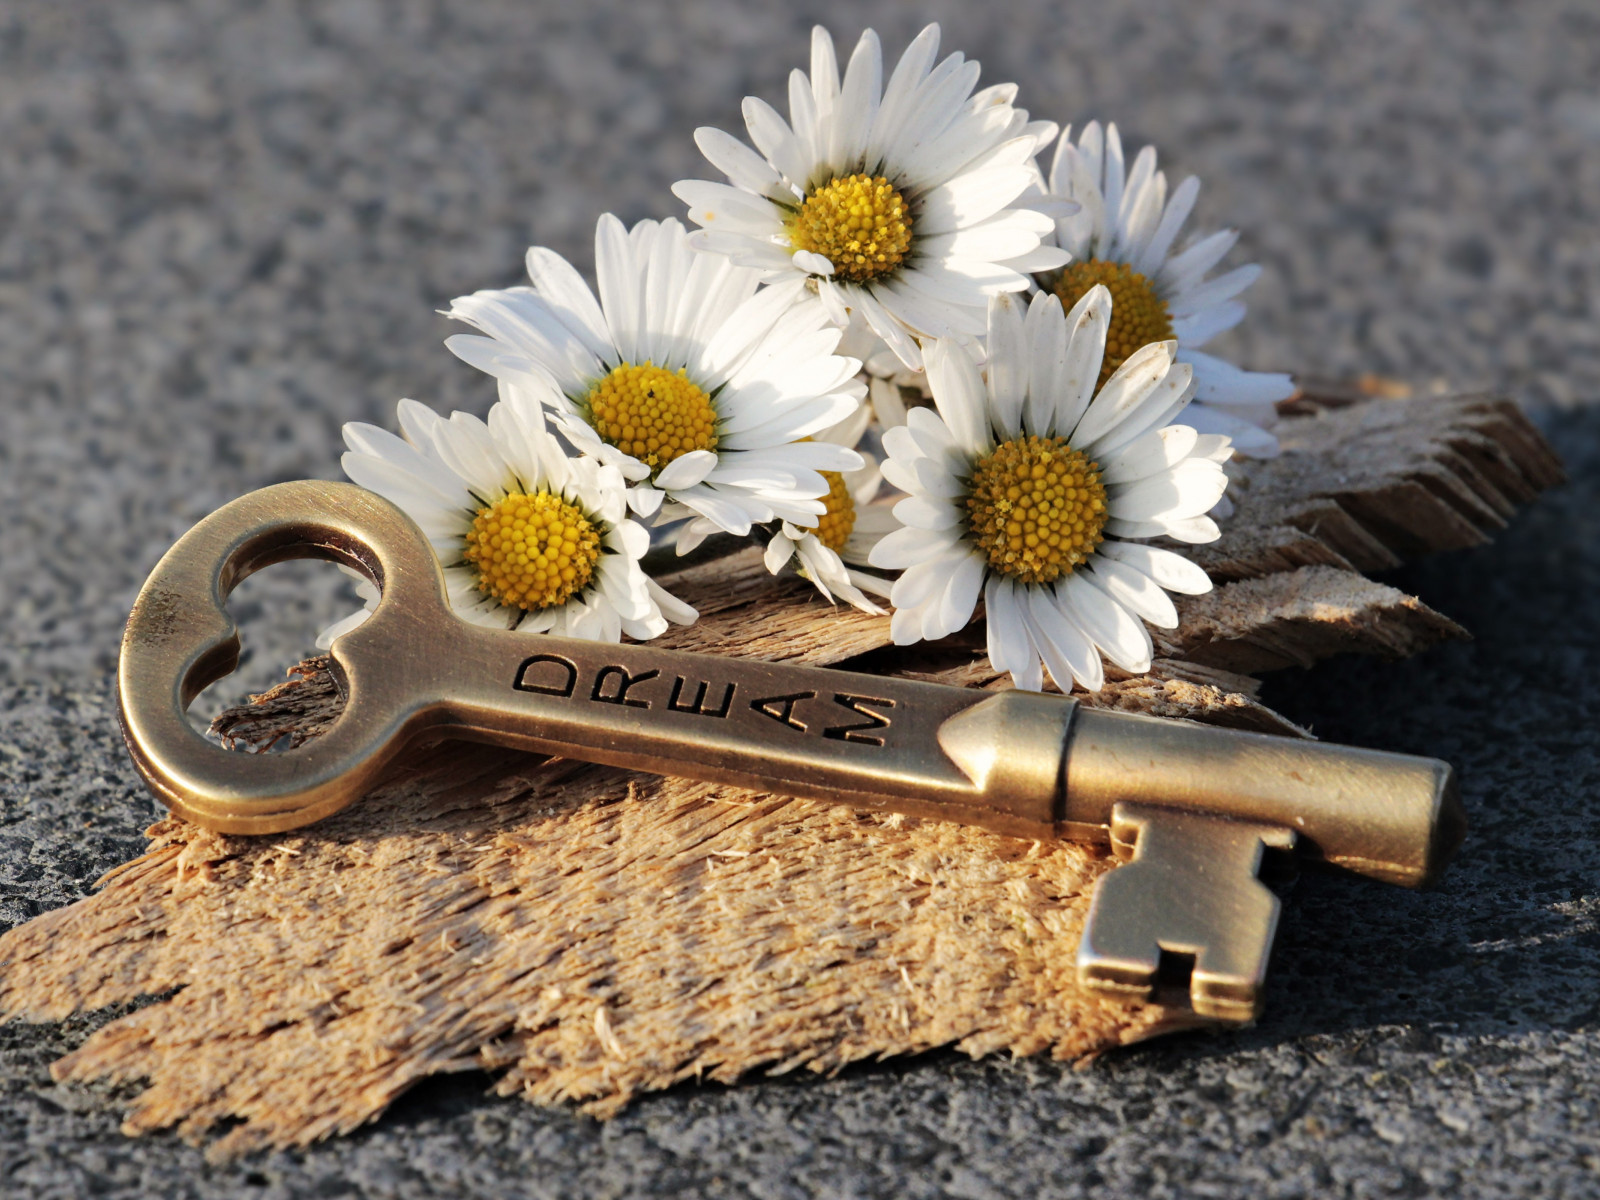 The dreams key and daisy flowers wallpaper 1600x1200